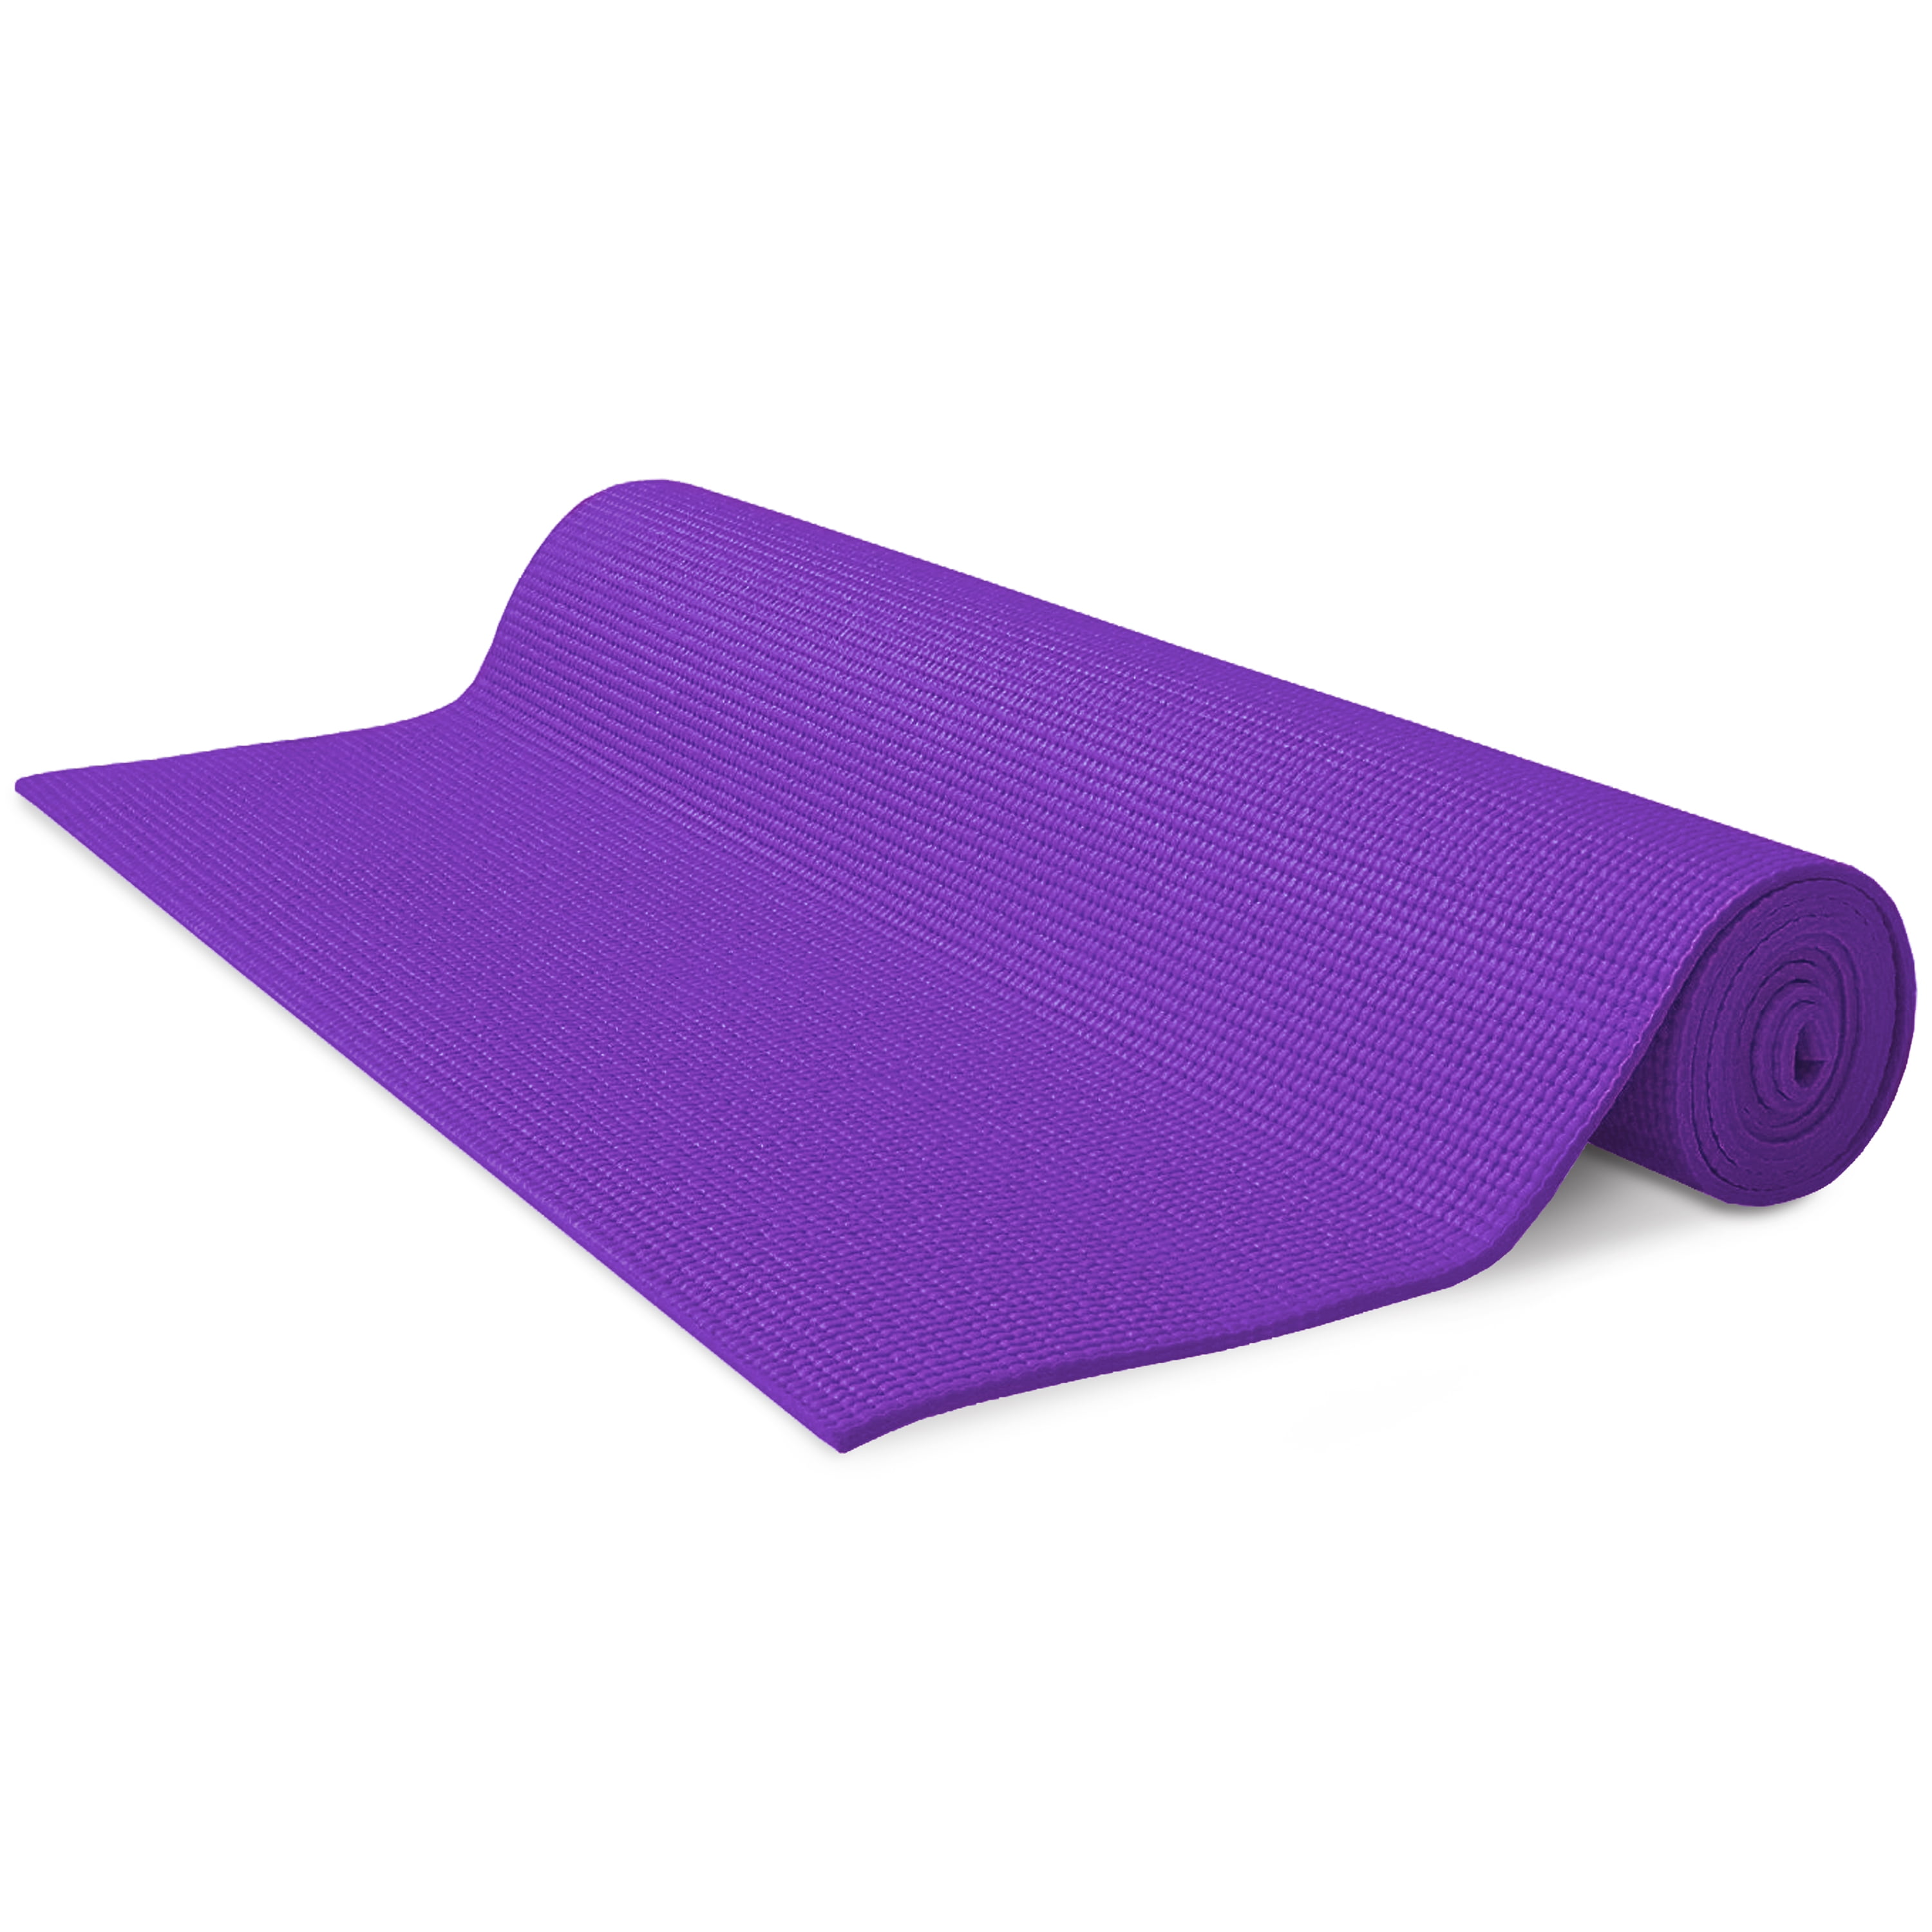 Closed Cell SGS Certified Earth-Friendly Exercise Gym Mat Bean Products Yogi Premium Yoga Mat Non-toxic Slip Resistant Double Sided 4mm Thick Extra-Long 73” L x 24” W Non-Skid